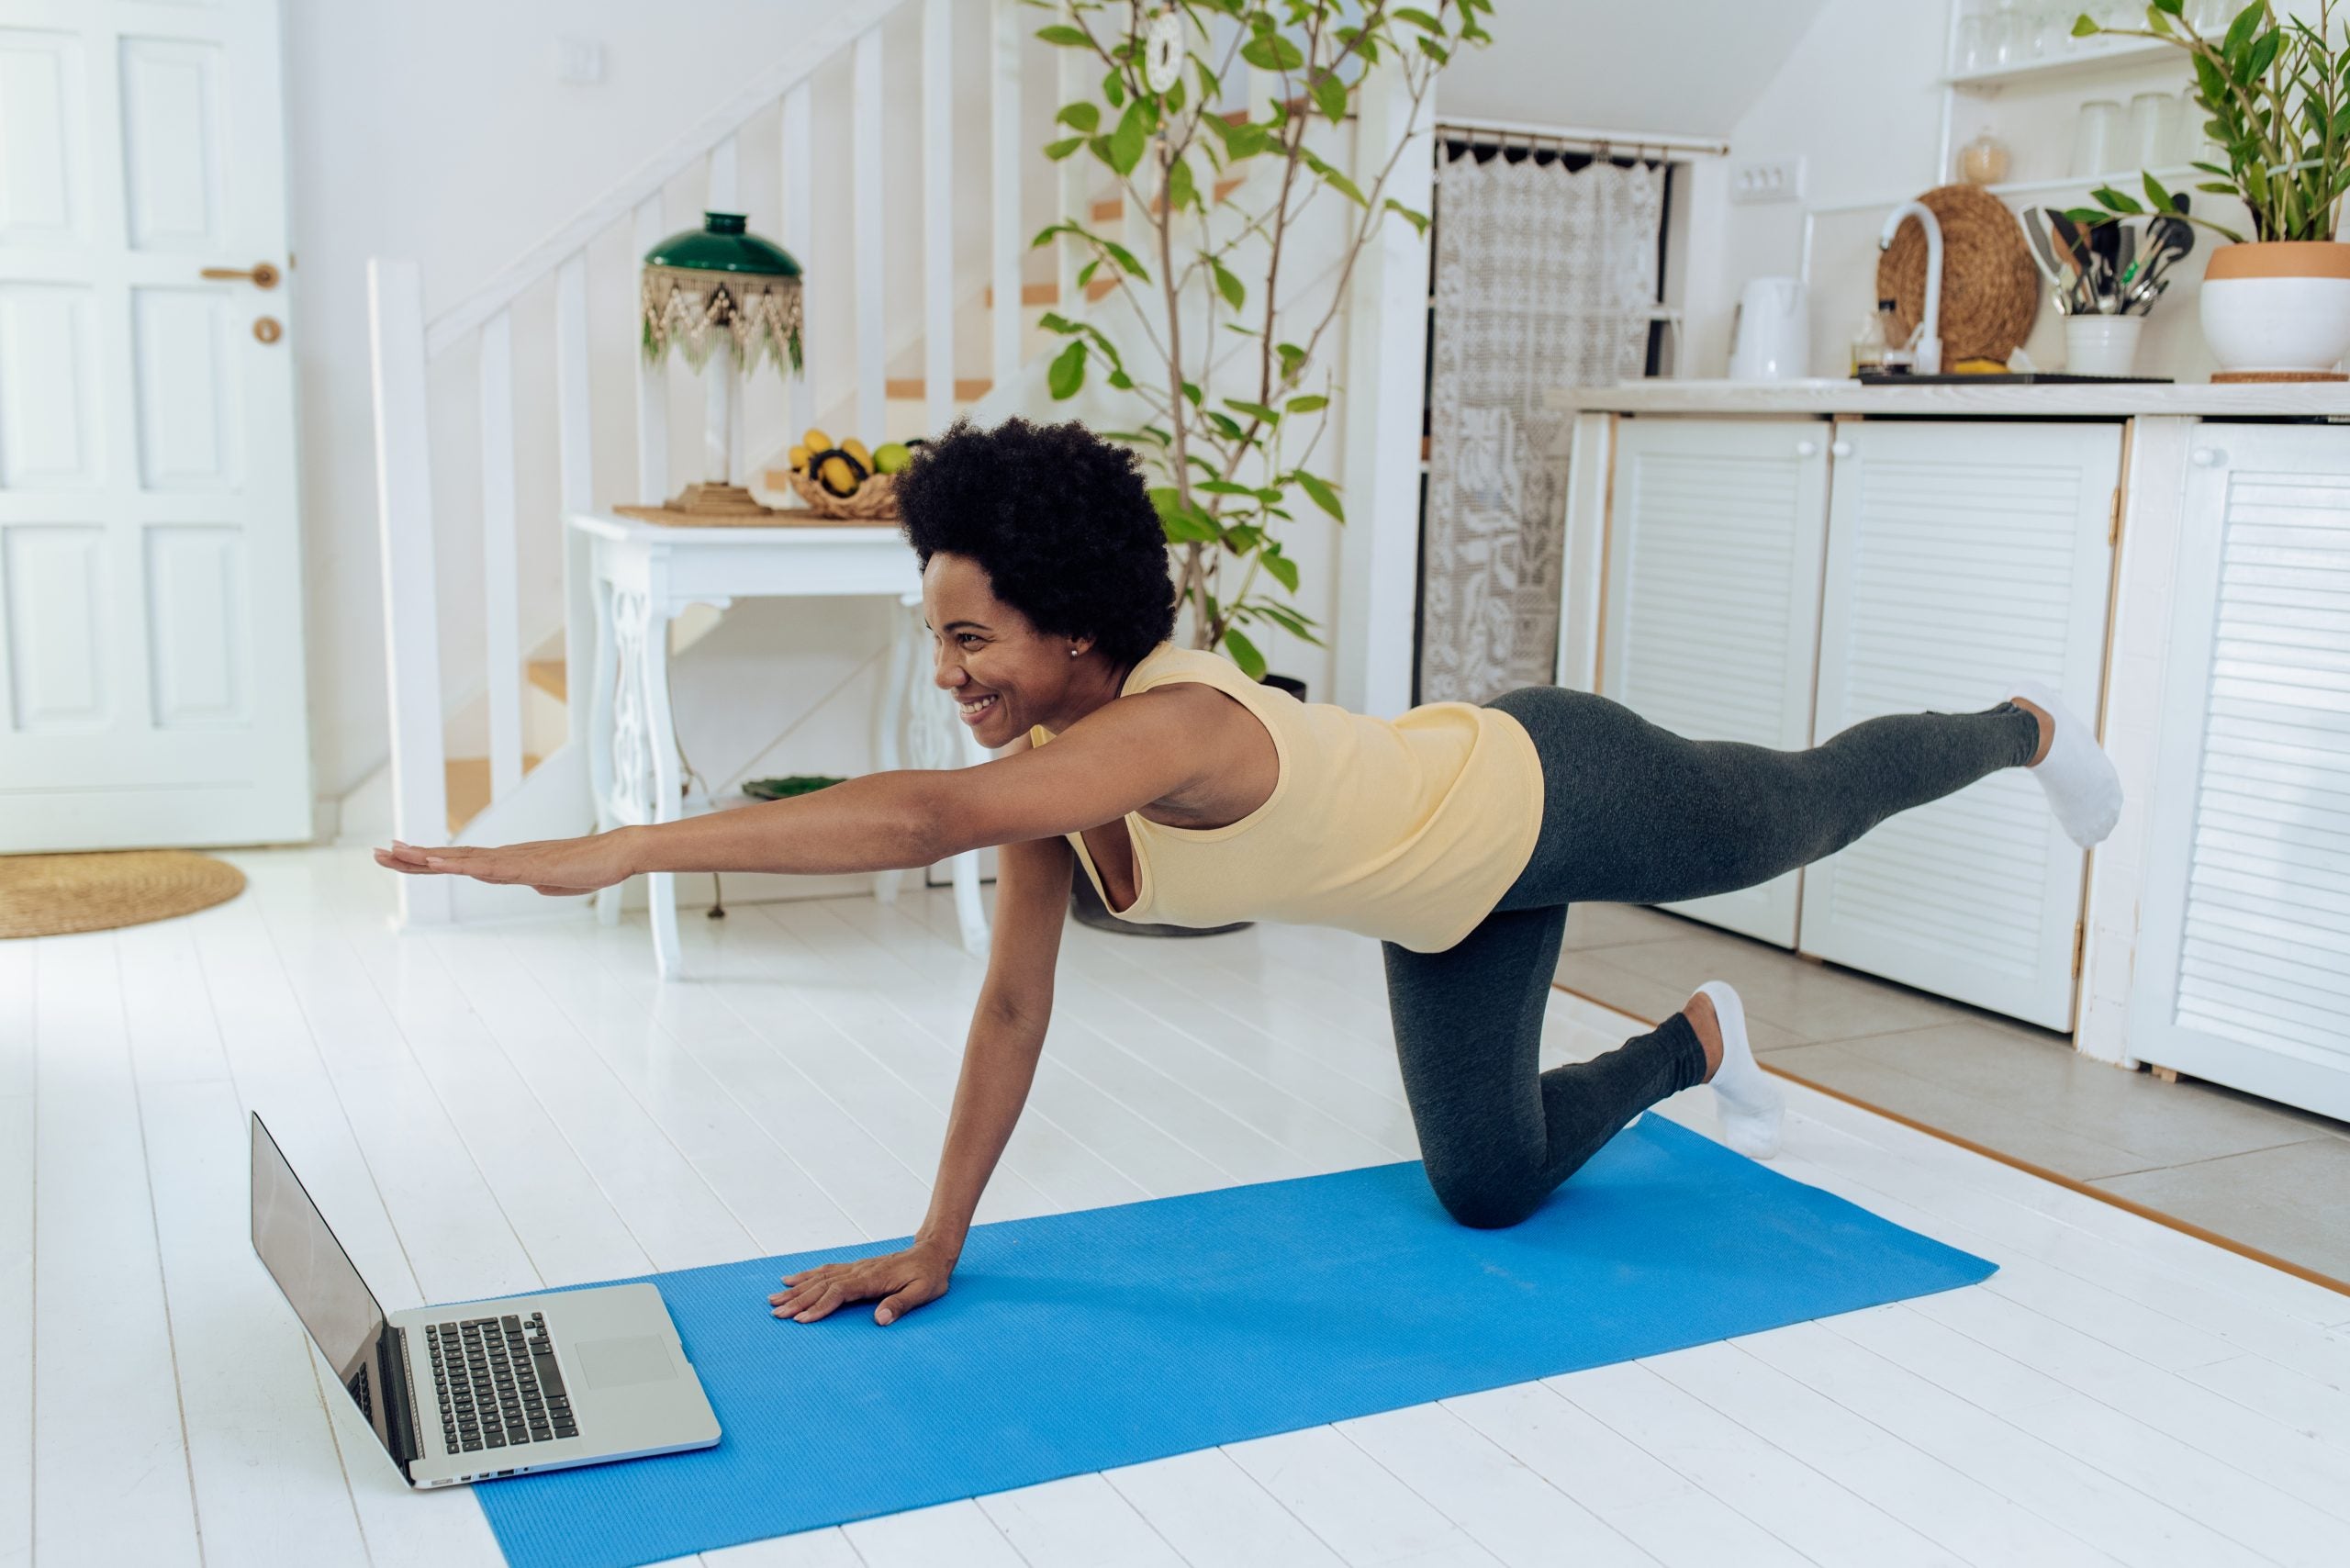 5 Best Exercises To Get Rid Of Your Mommy Pooch